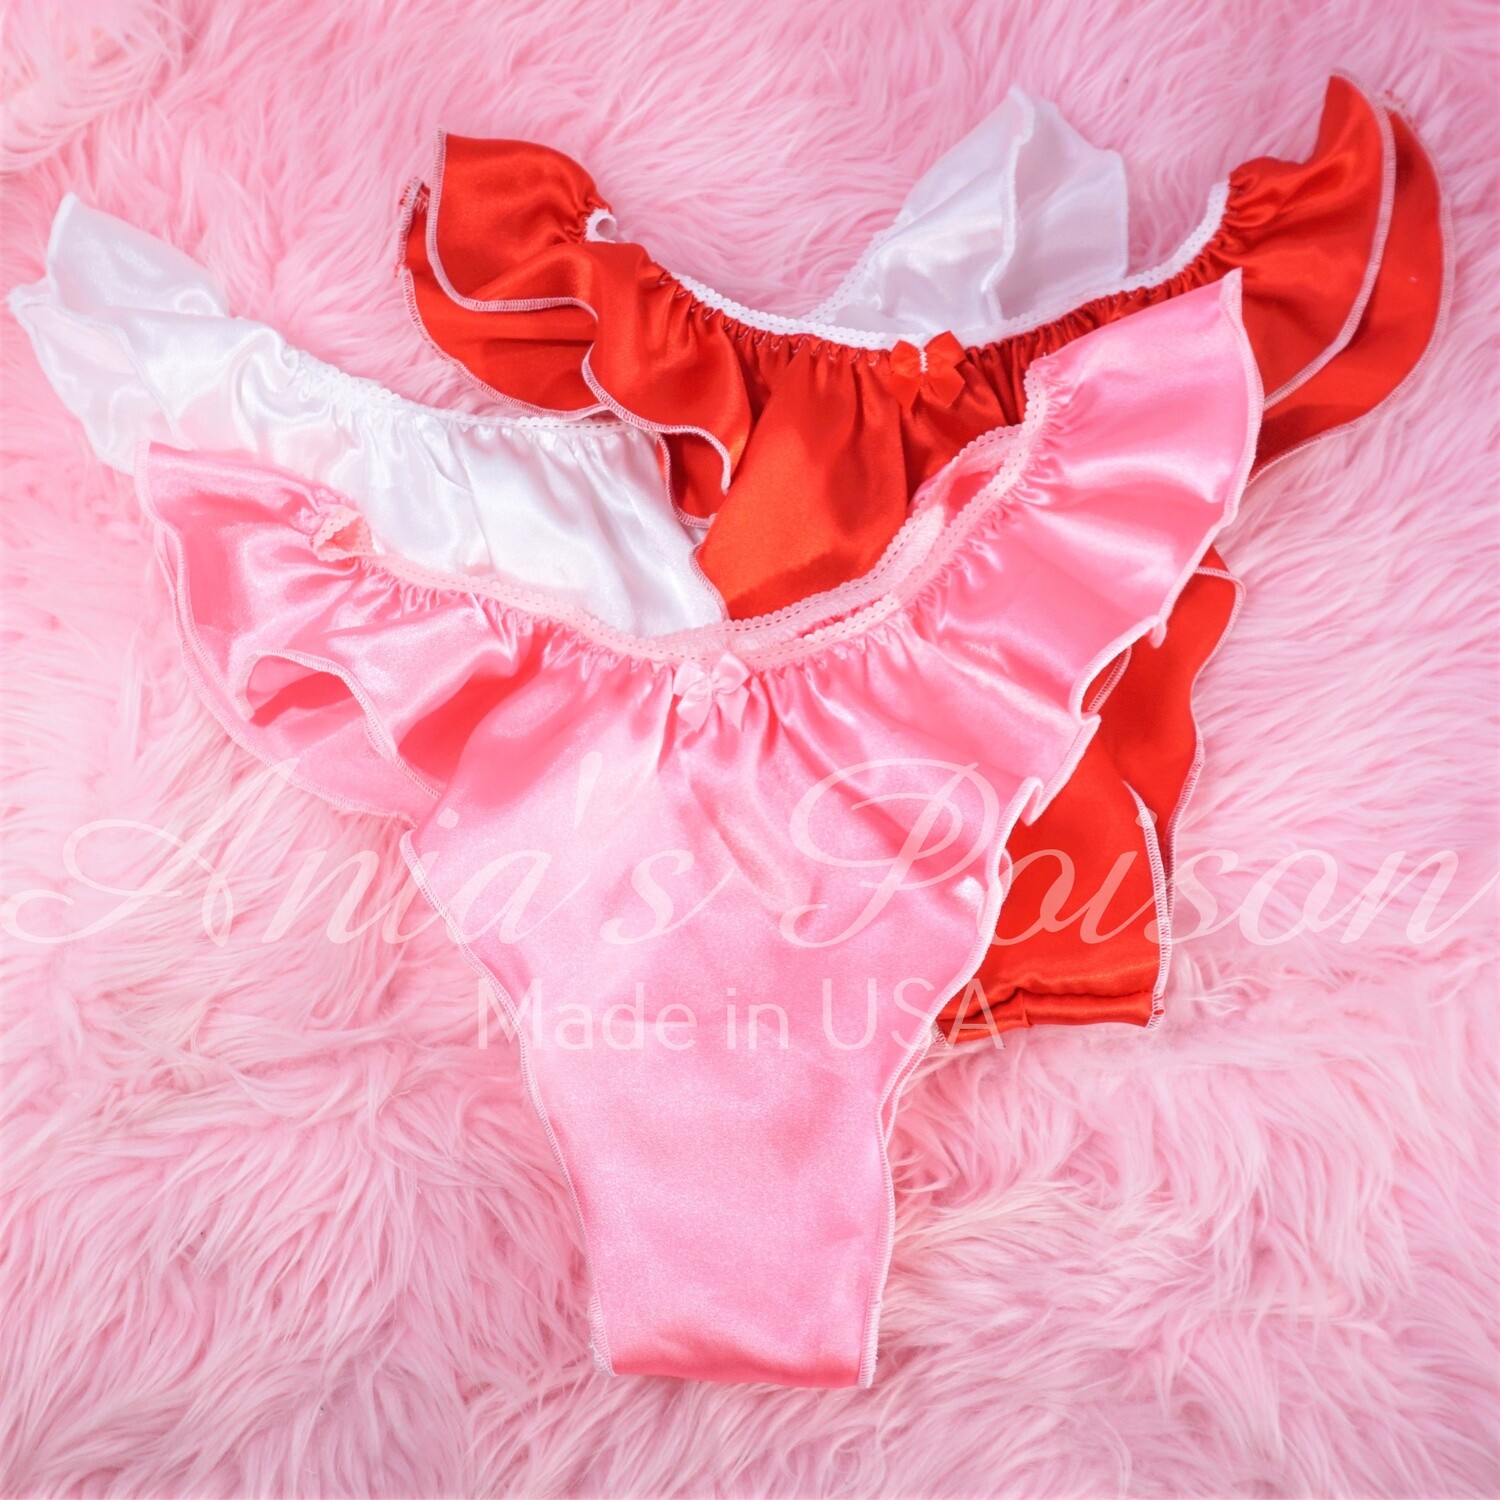 Ania's Poison Valentine's Gift set 3 pairs of Satin shiny Brazilian flutter panties Red Pink White wetlook